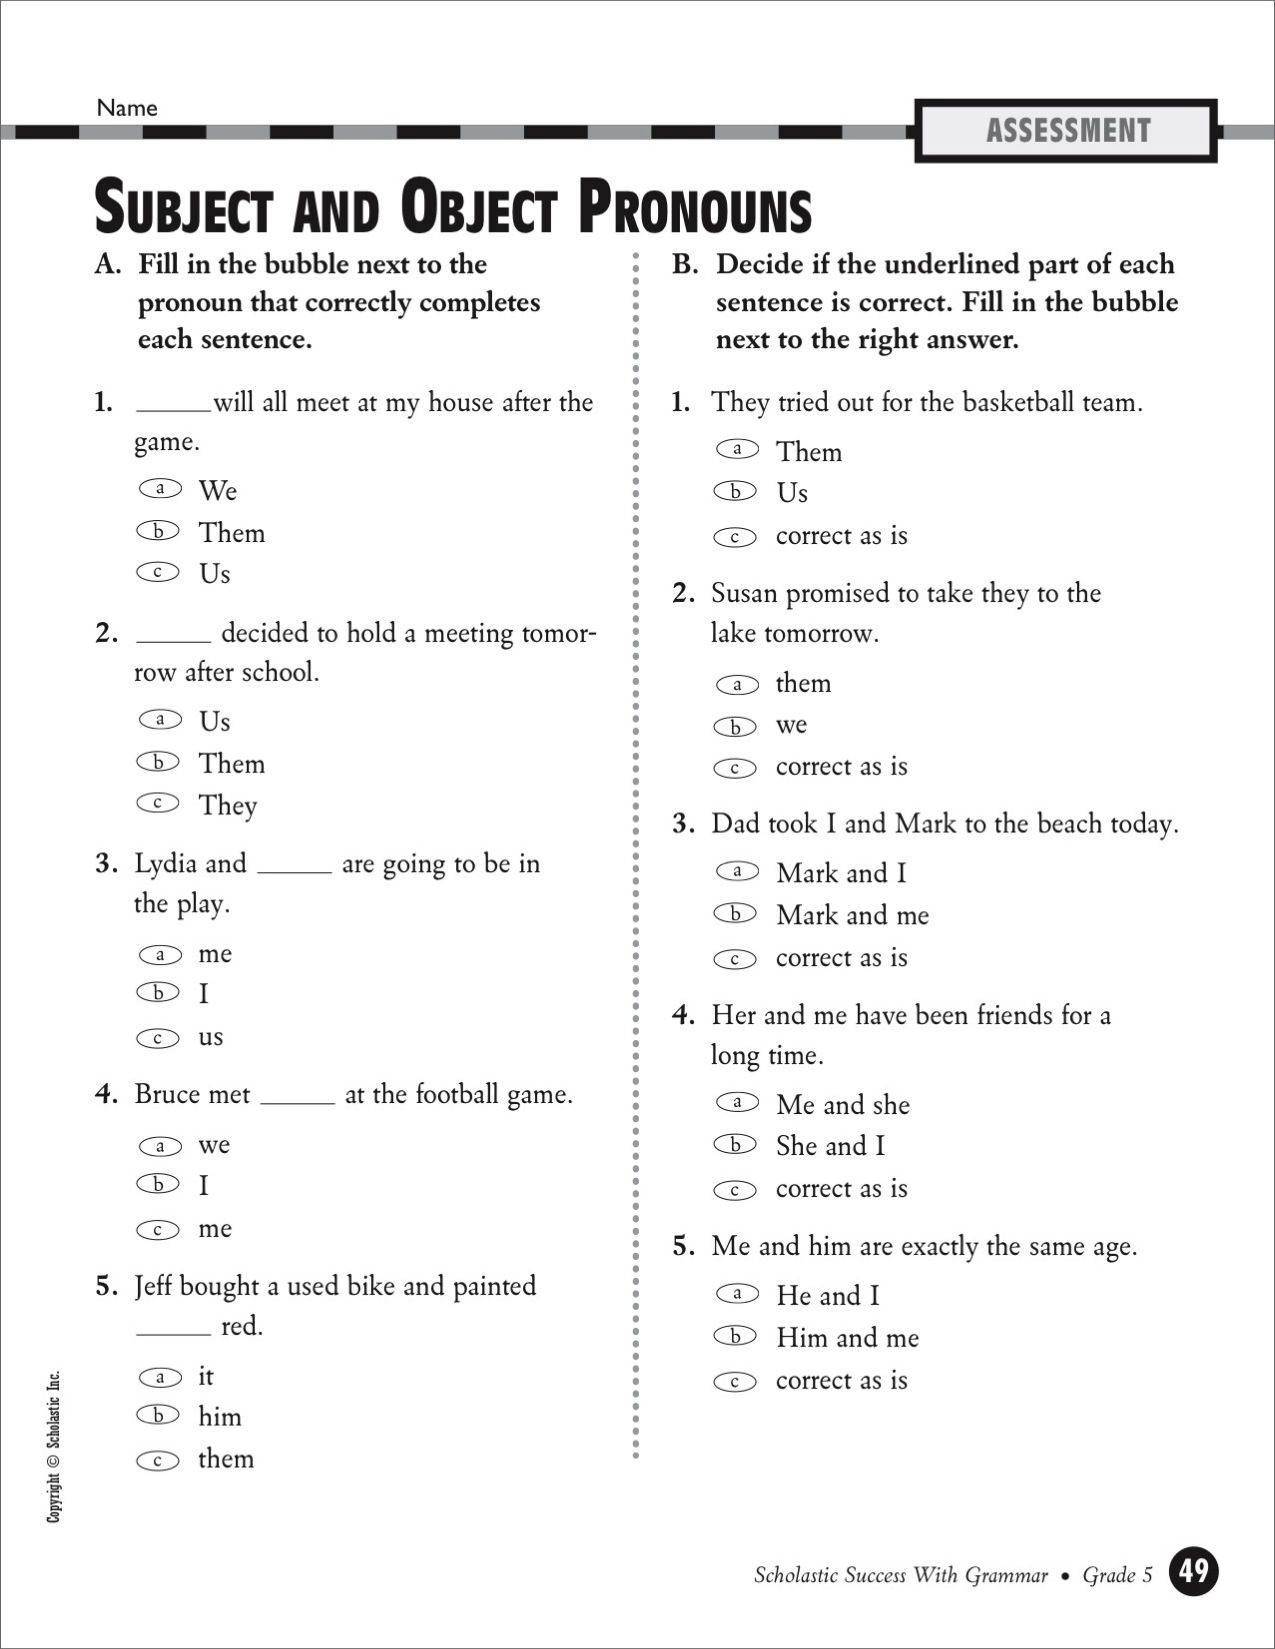 Pronouns Worksheets 5th Grade Subject and Object Pronouns Grade 5 Printables